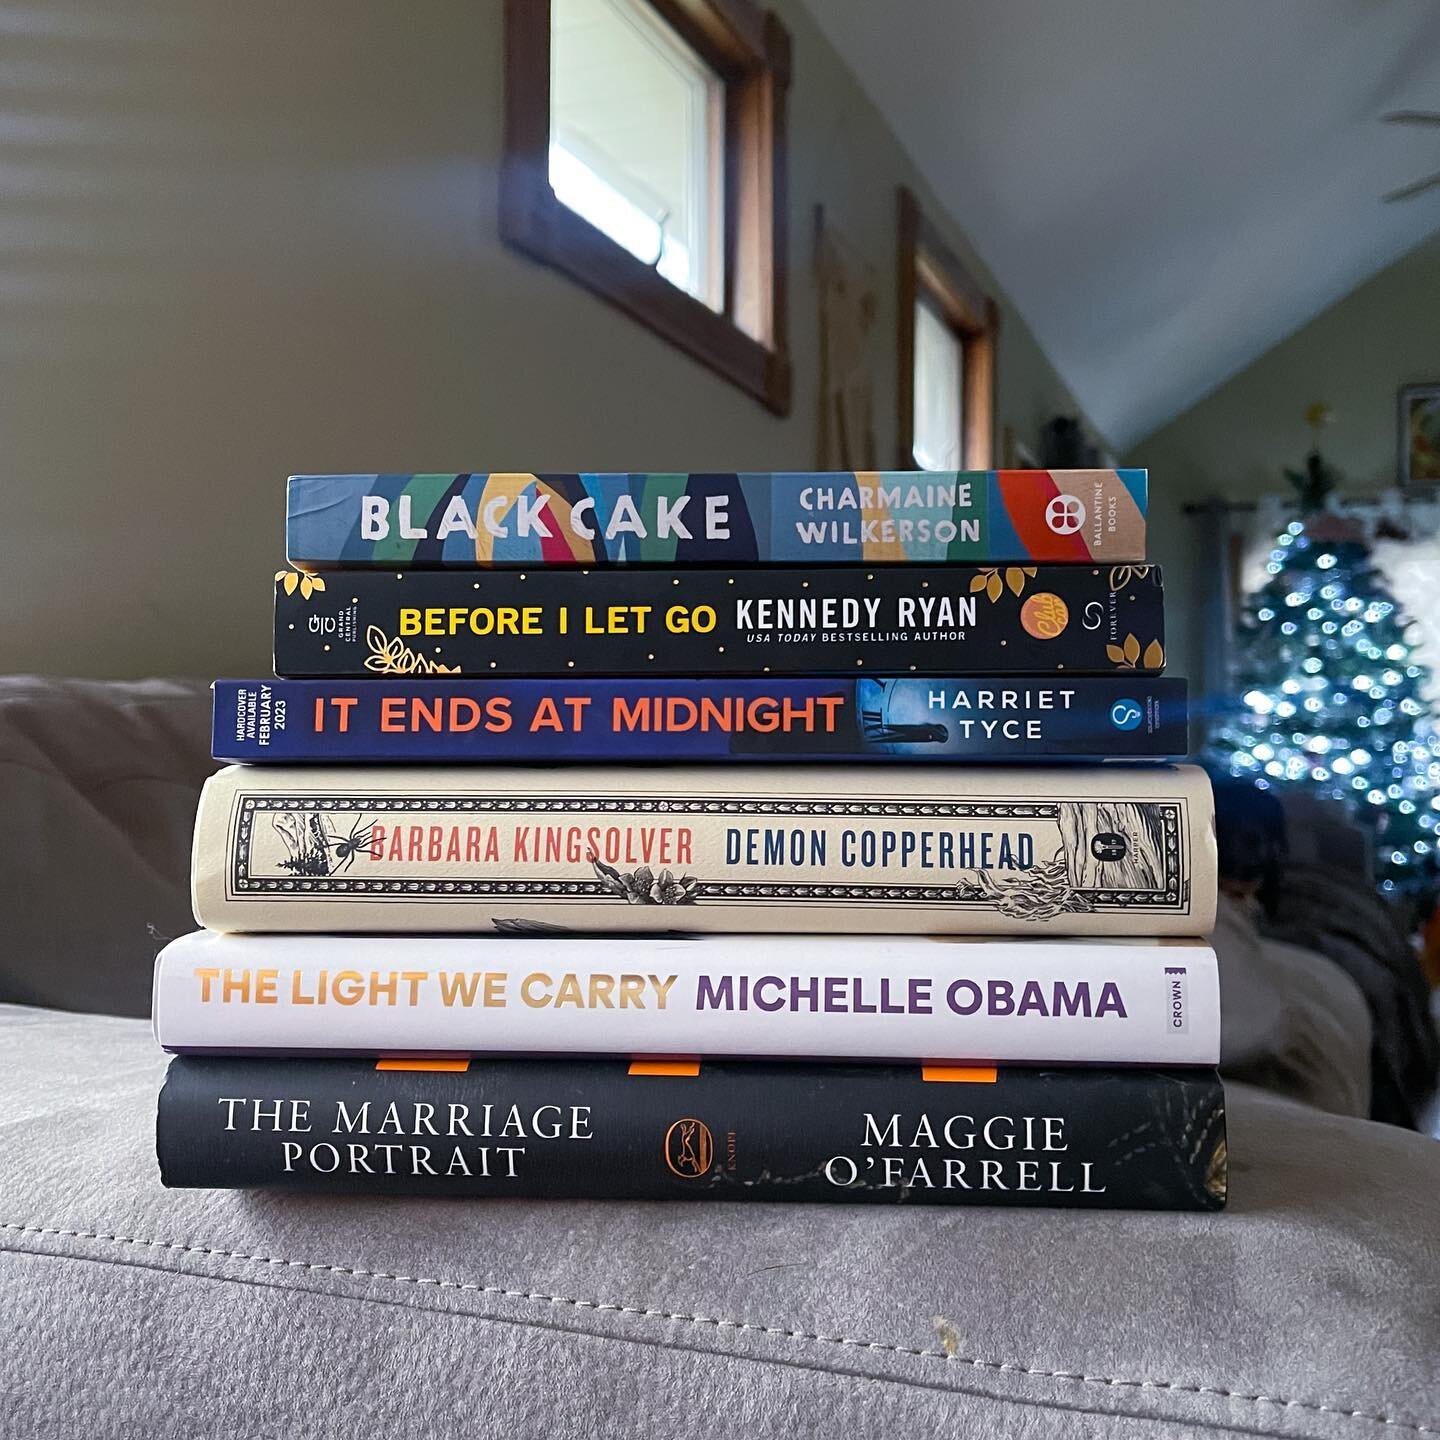 My December TBR. My calendar is packed with lots of activities this month so who knows how much  reading I&rsquo;ll do&hellip; but these are the books I&rsquo;d love to get to!